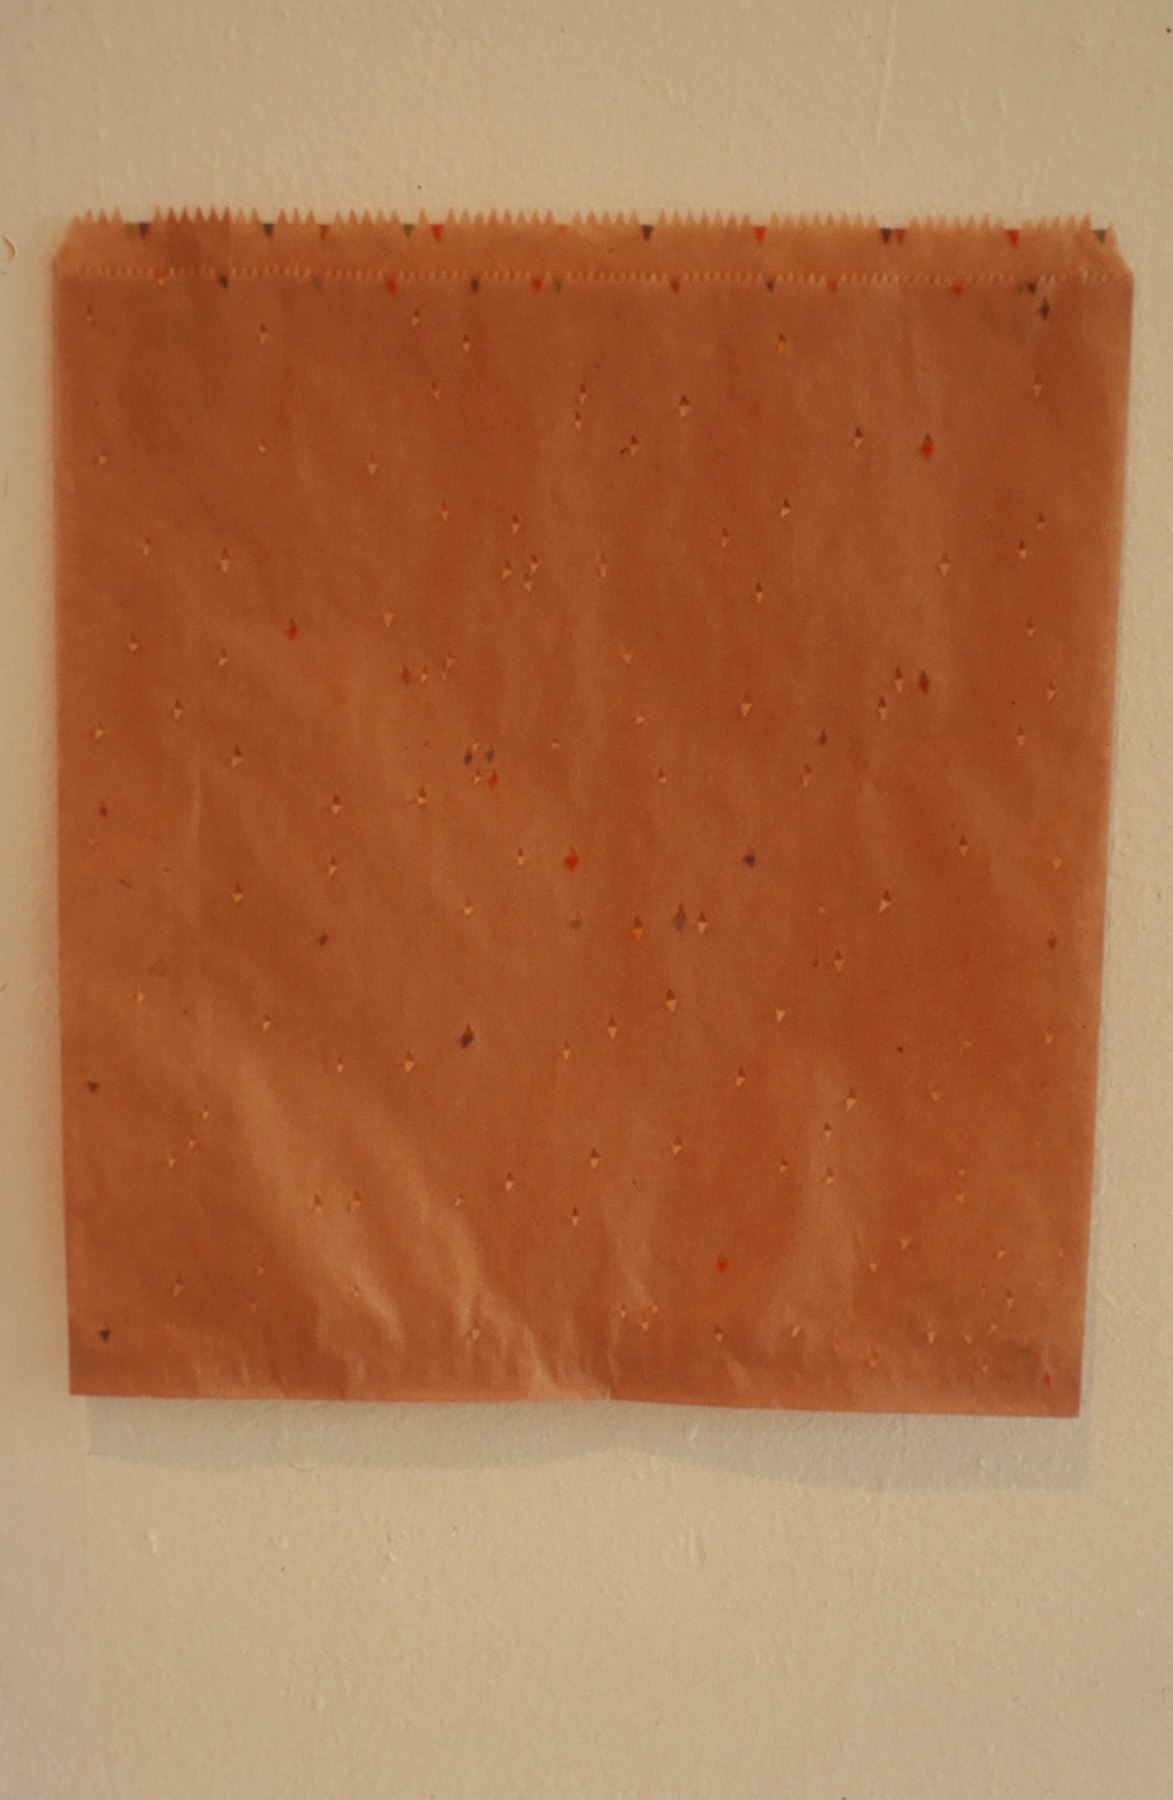 Hughes, brown paper bag with coloring